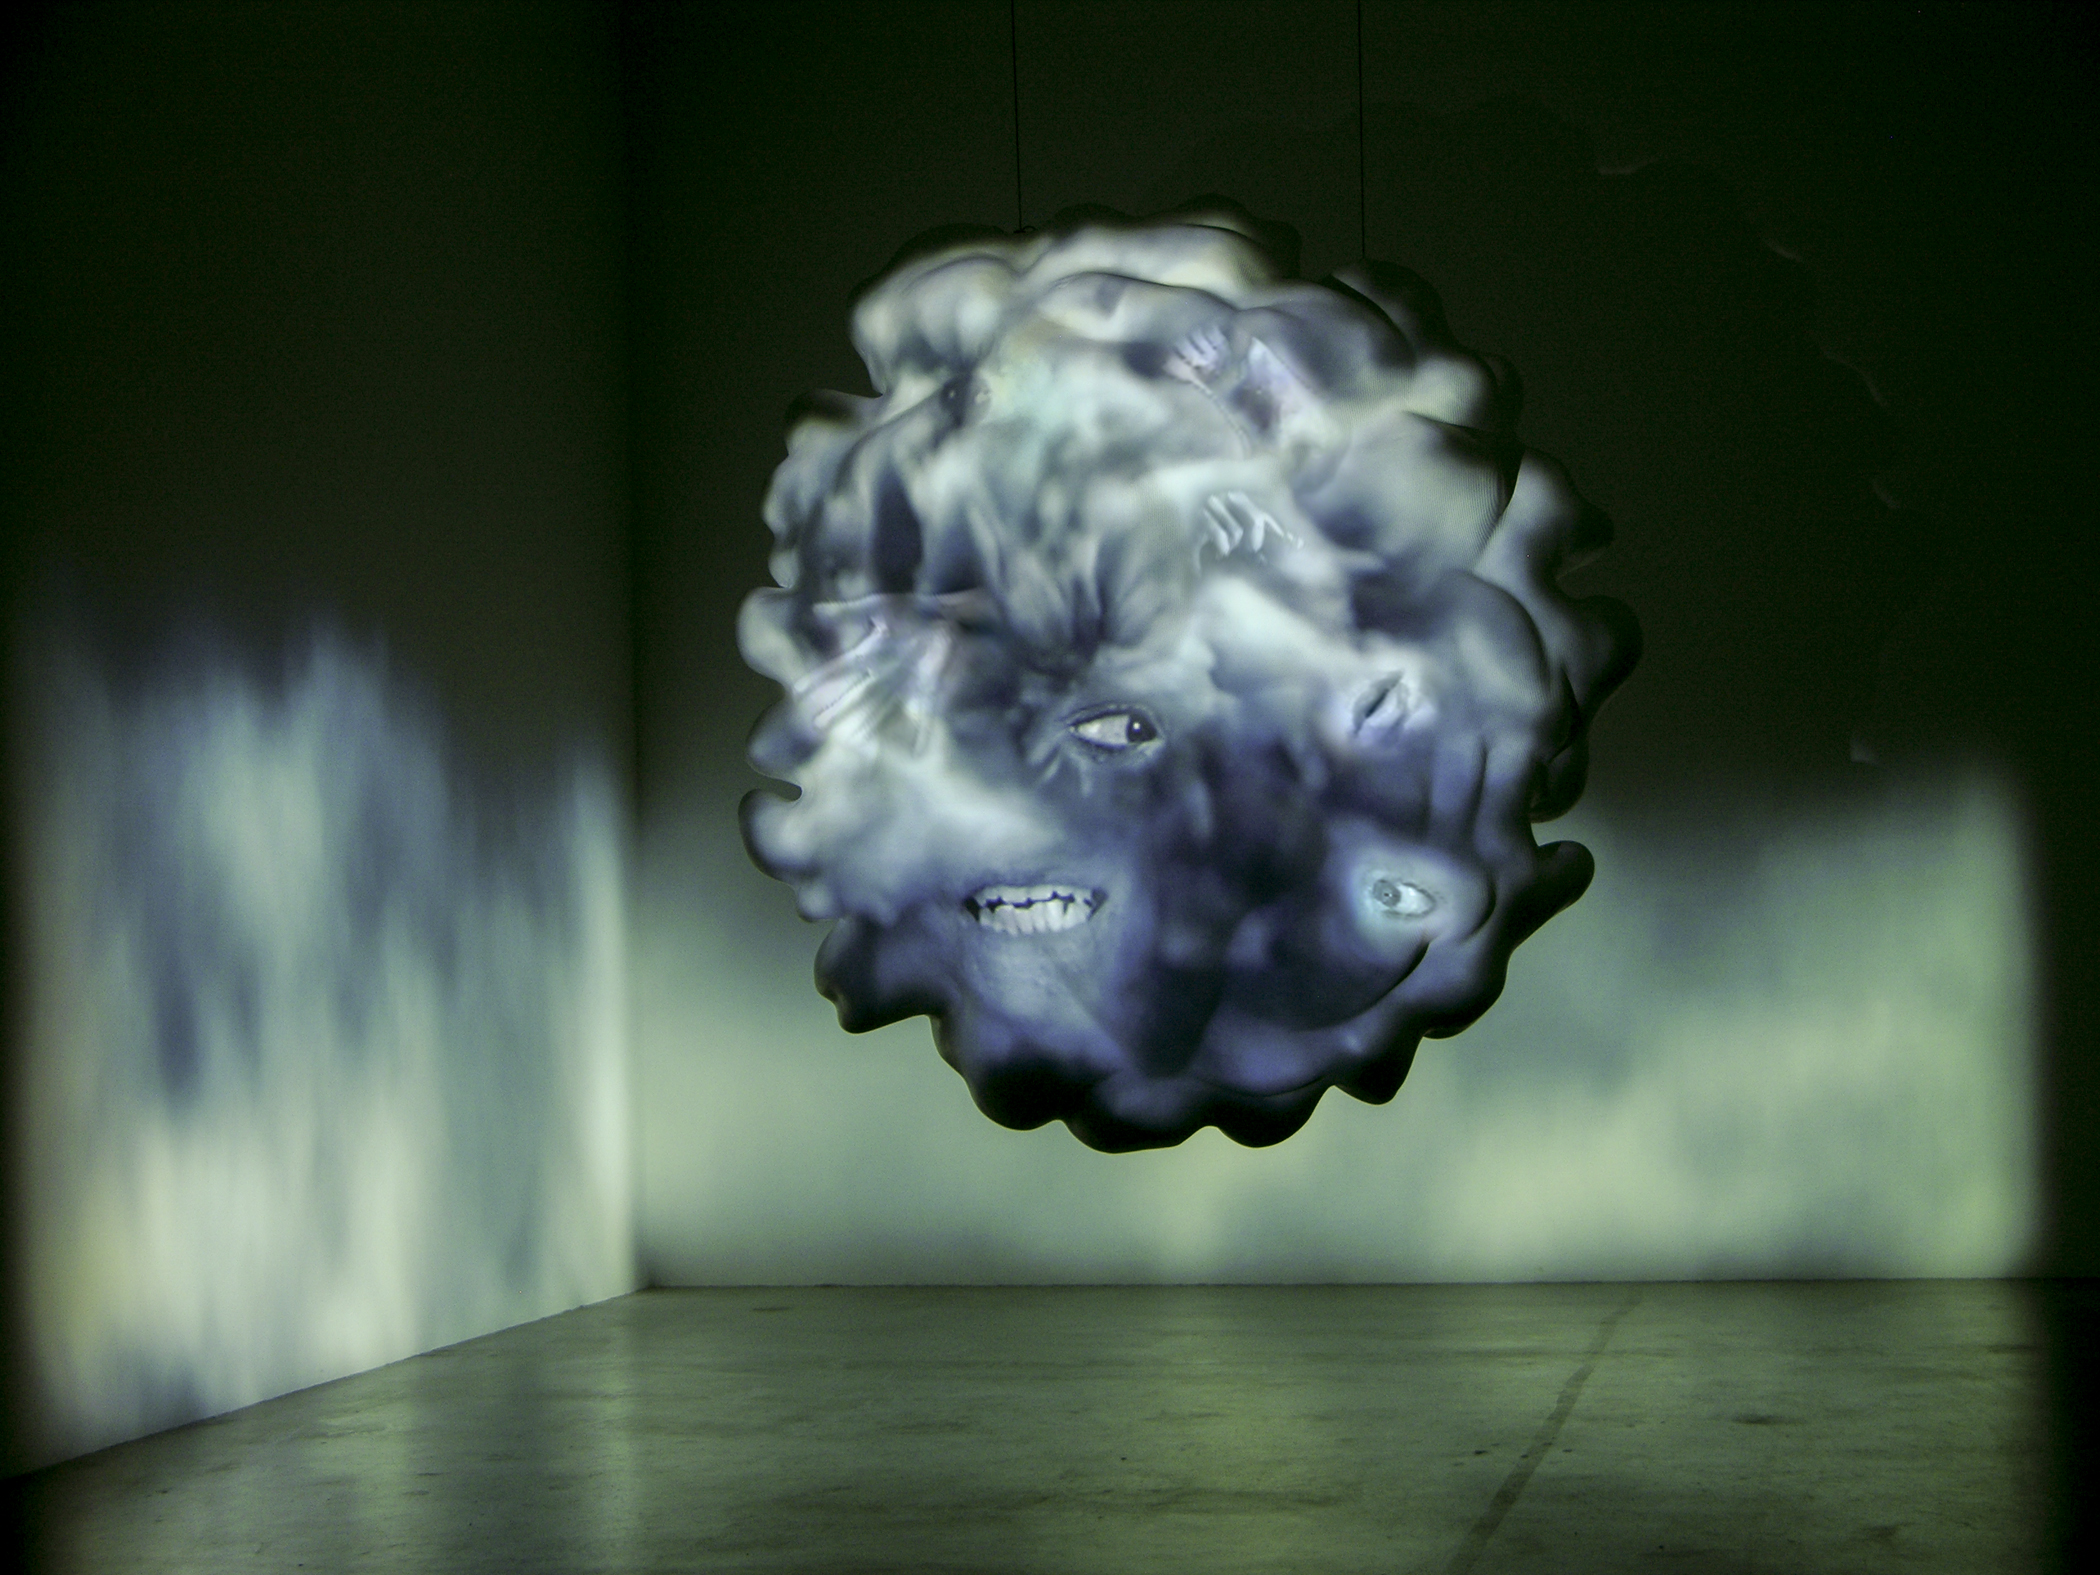 Tony Oursler (American, born 1957), Dust, from Thought Forms, 2006. Fiberglass sculpture, Hardon Kardon HS100 5.1 sound system, Sony XGA VPL-PXL-41 projector, 2 Sanyo PLC-XU48 projectors, 3 DVD players, 6 DVDs, and 3 master tapes. 72 × 72 × 72 in. The Broad Art Foundation, Los Angeles CA, F-Ours-1S06.05. Photo: Courtesy Tony Oursler. © Tony Oursler